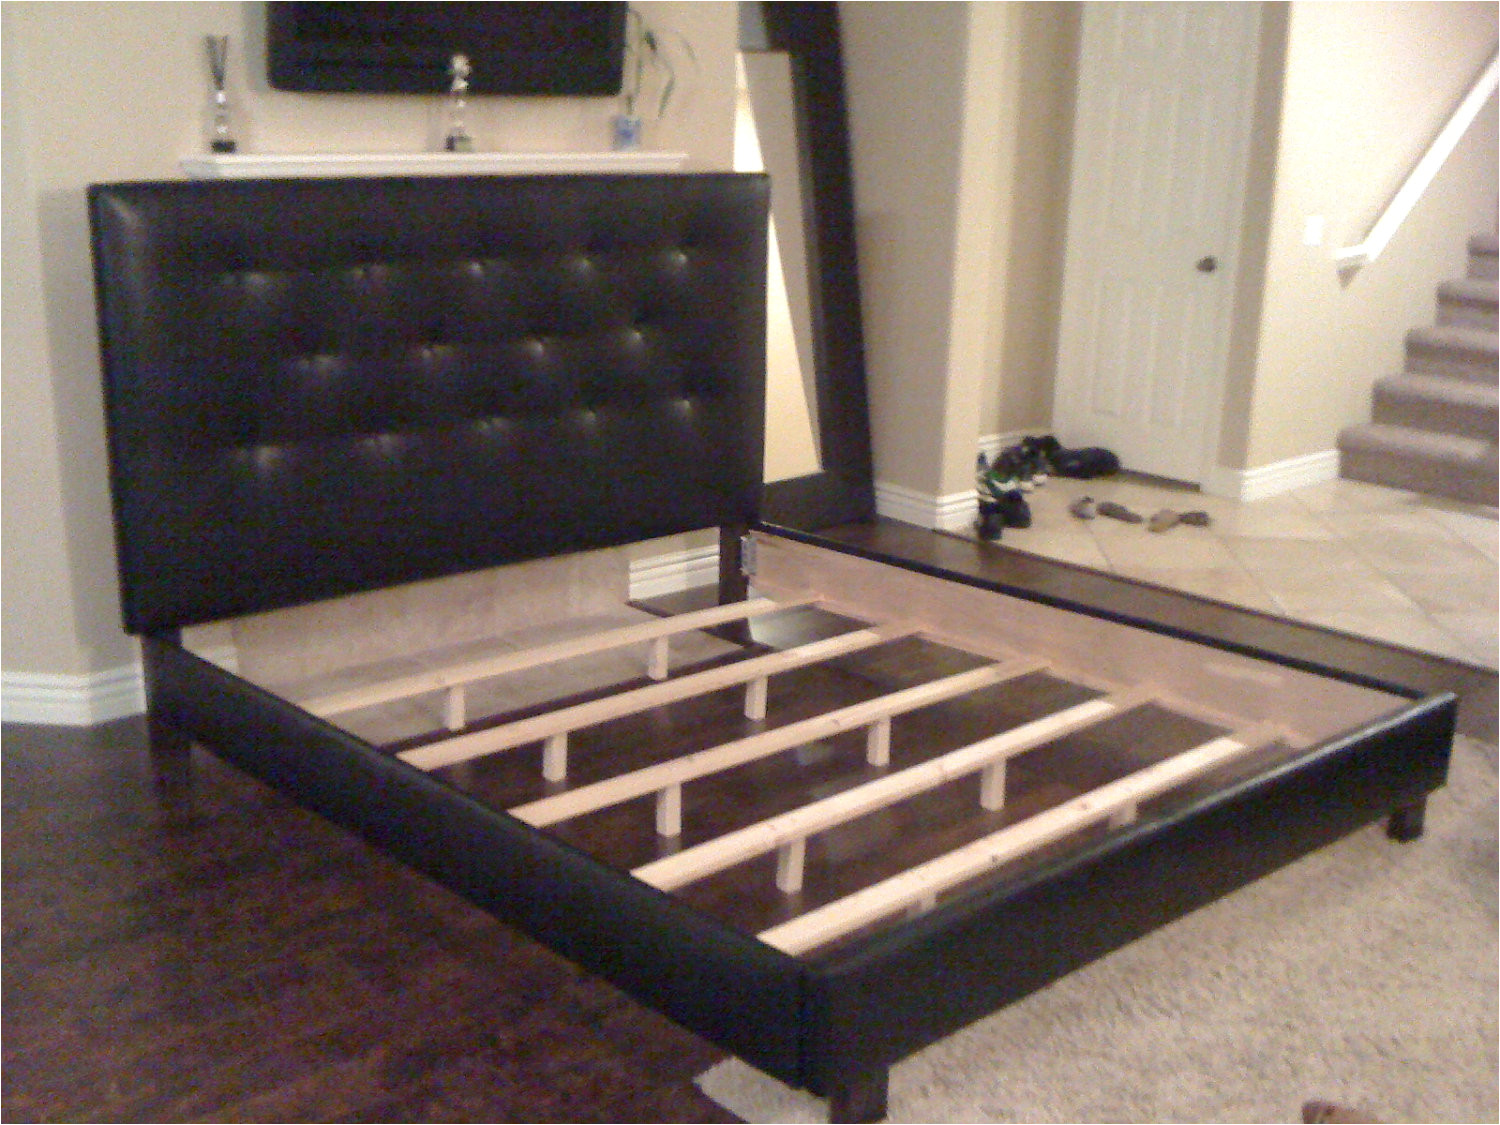 california king bed frame plans cal king bed frame yes free and open source plans for an easy to build results 1 24 of 228 online shopping for home kitchen